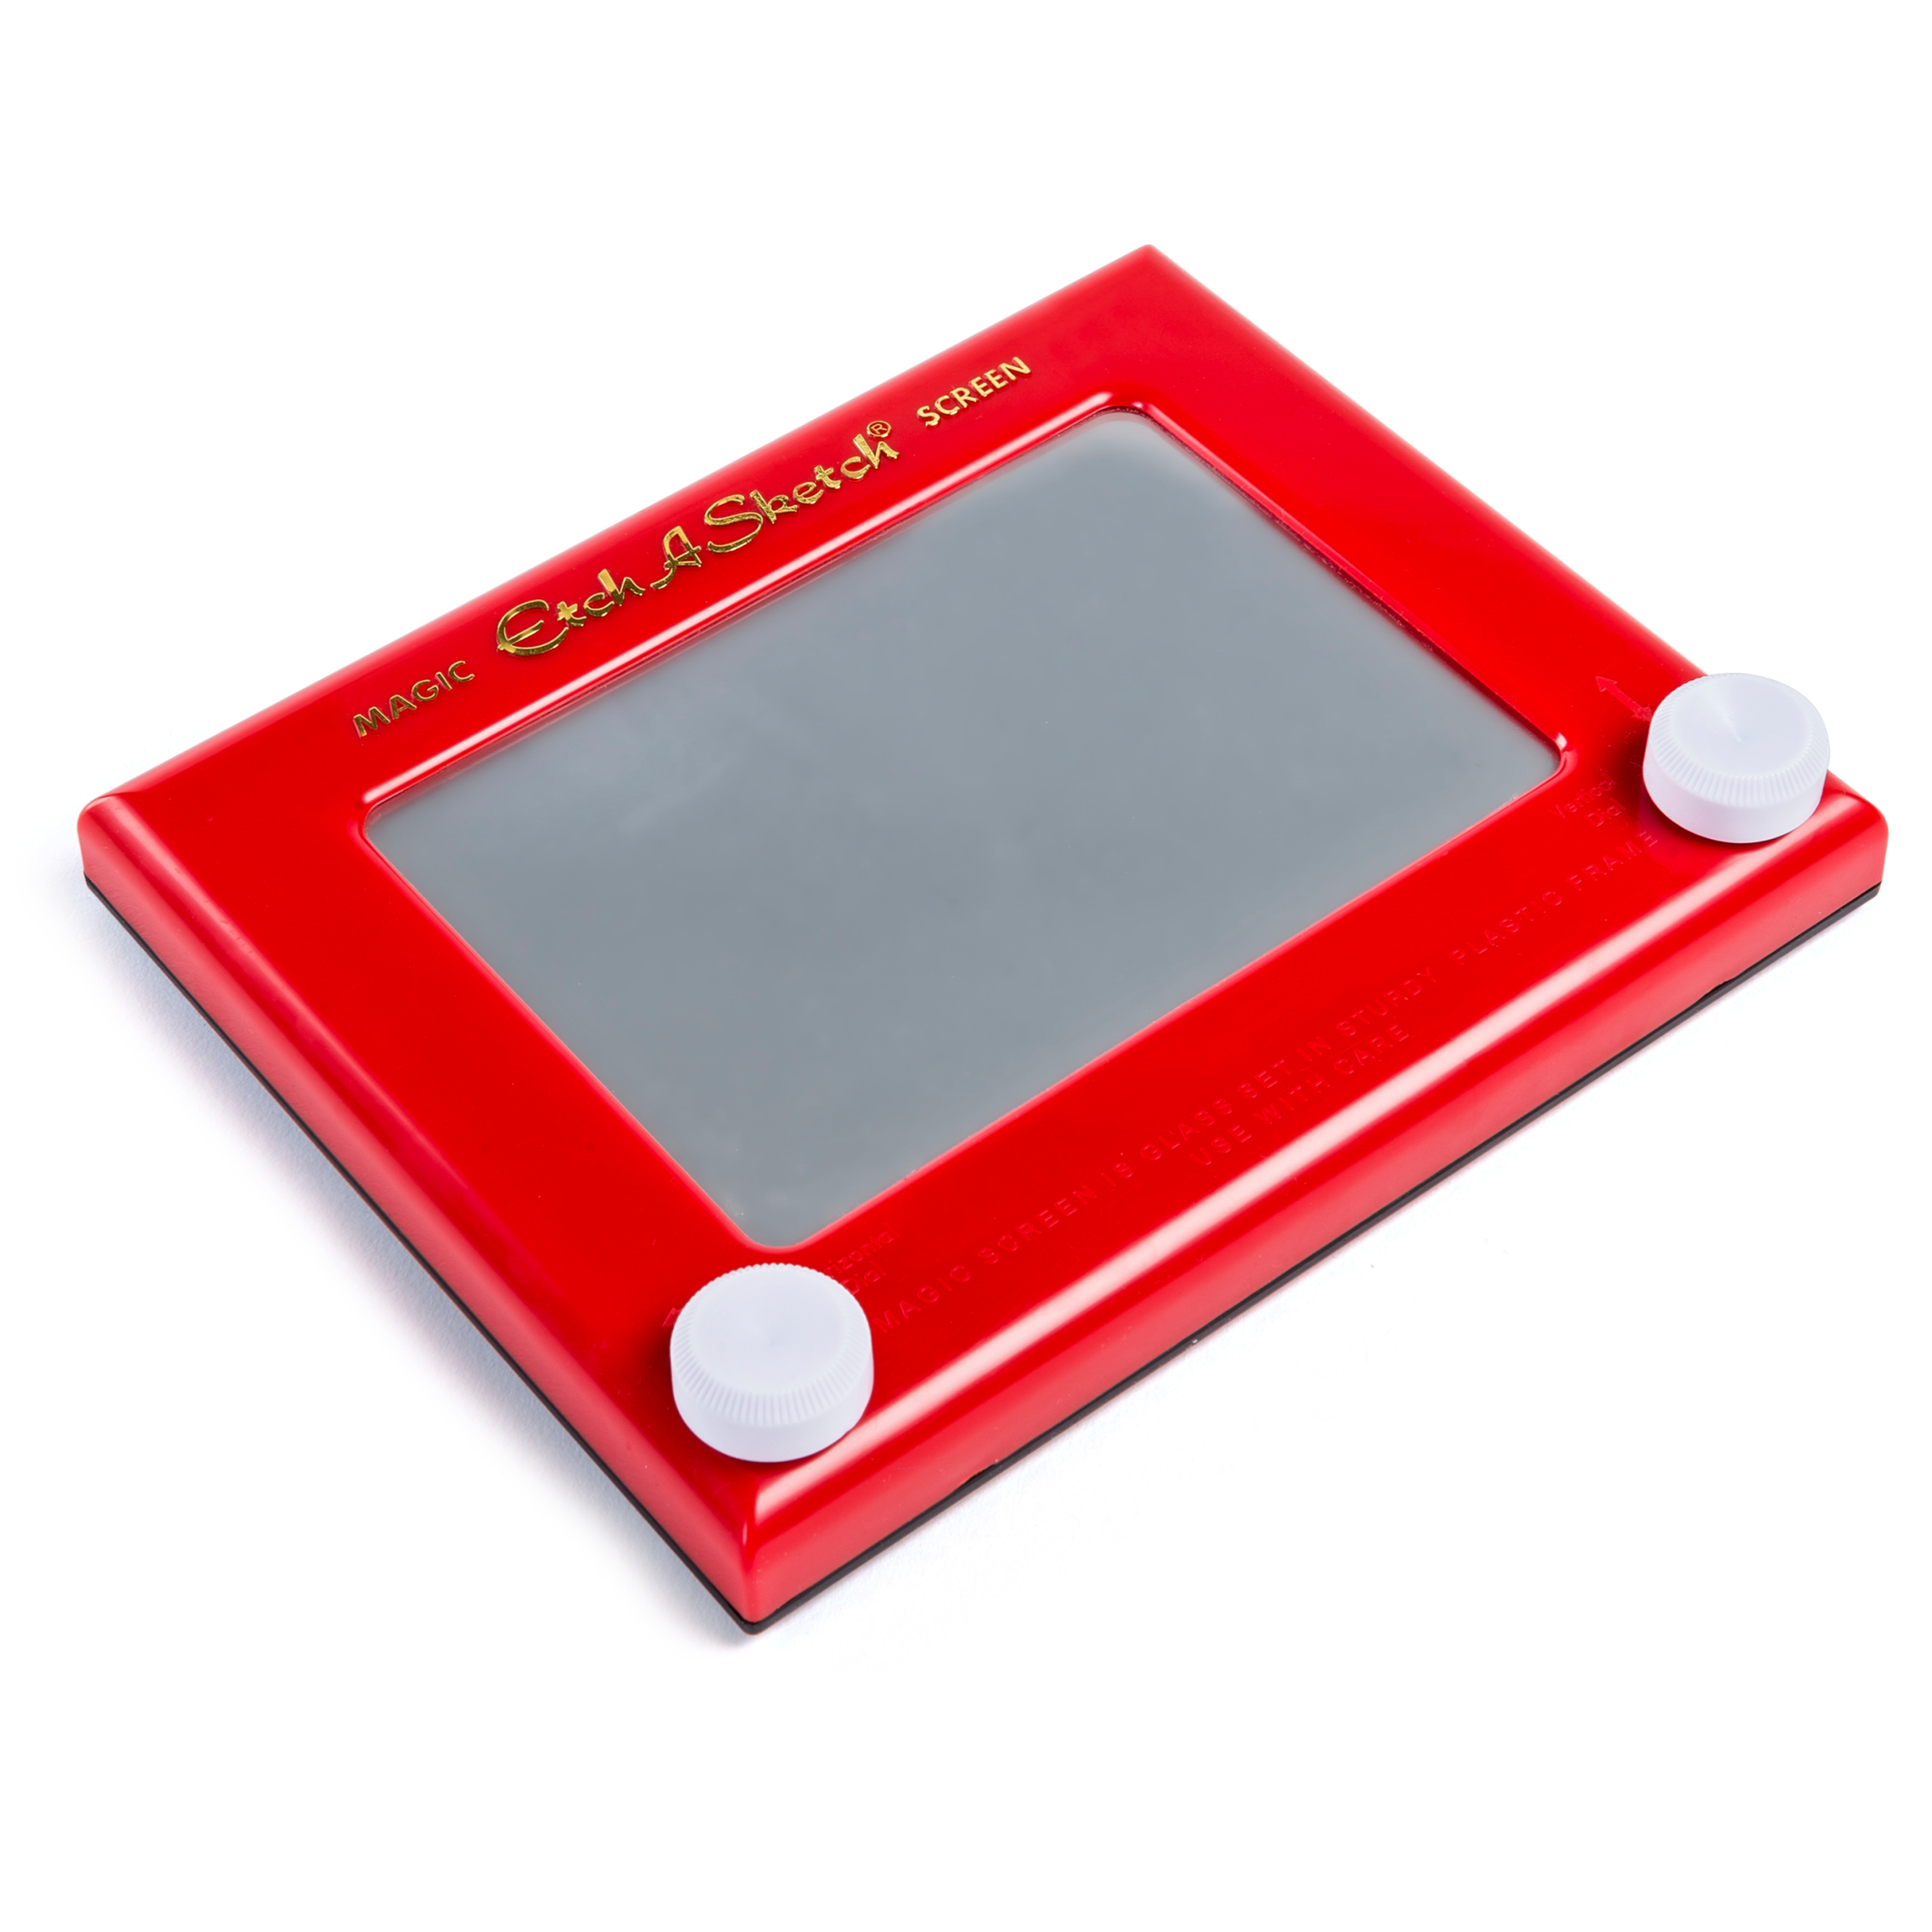 Etch A Sketch, Classic Red Drawing Toy with Magic Screen, for Ages 3 and Up - image 4 of 6